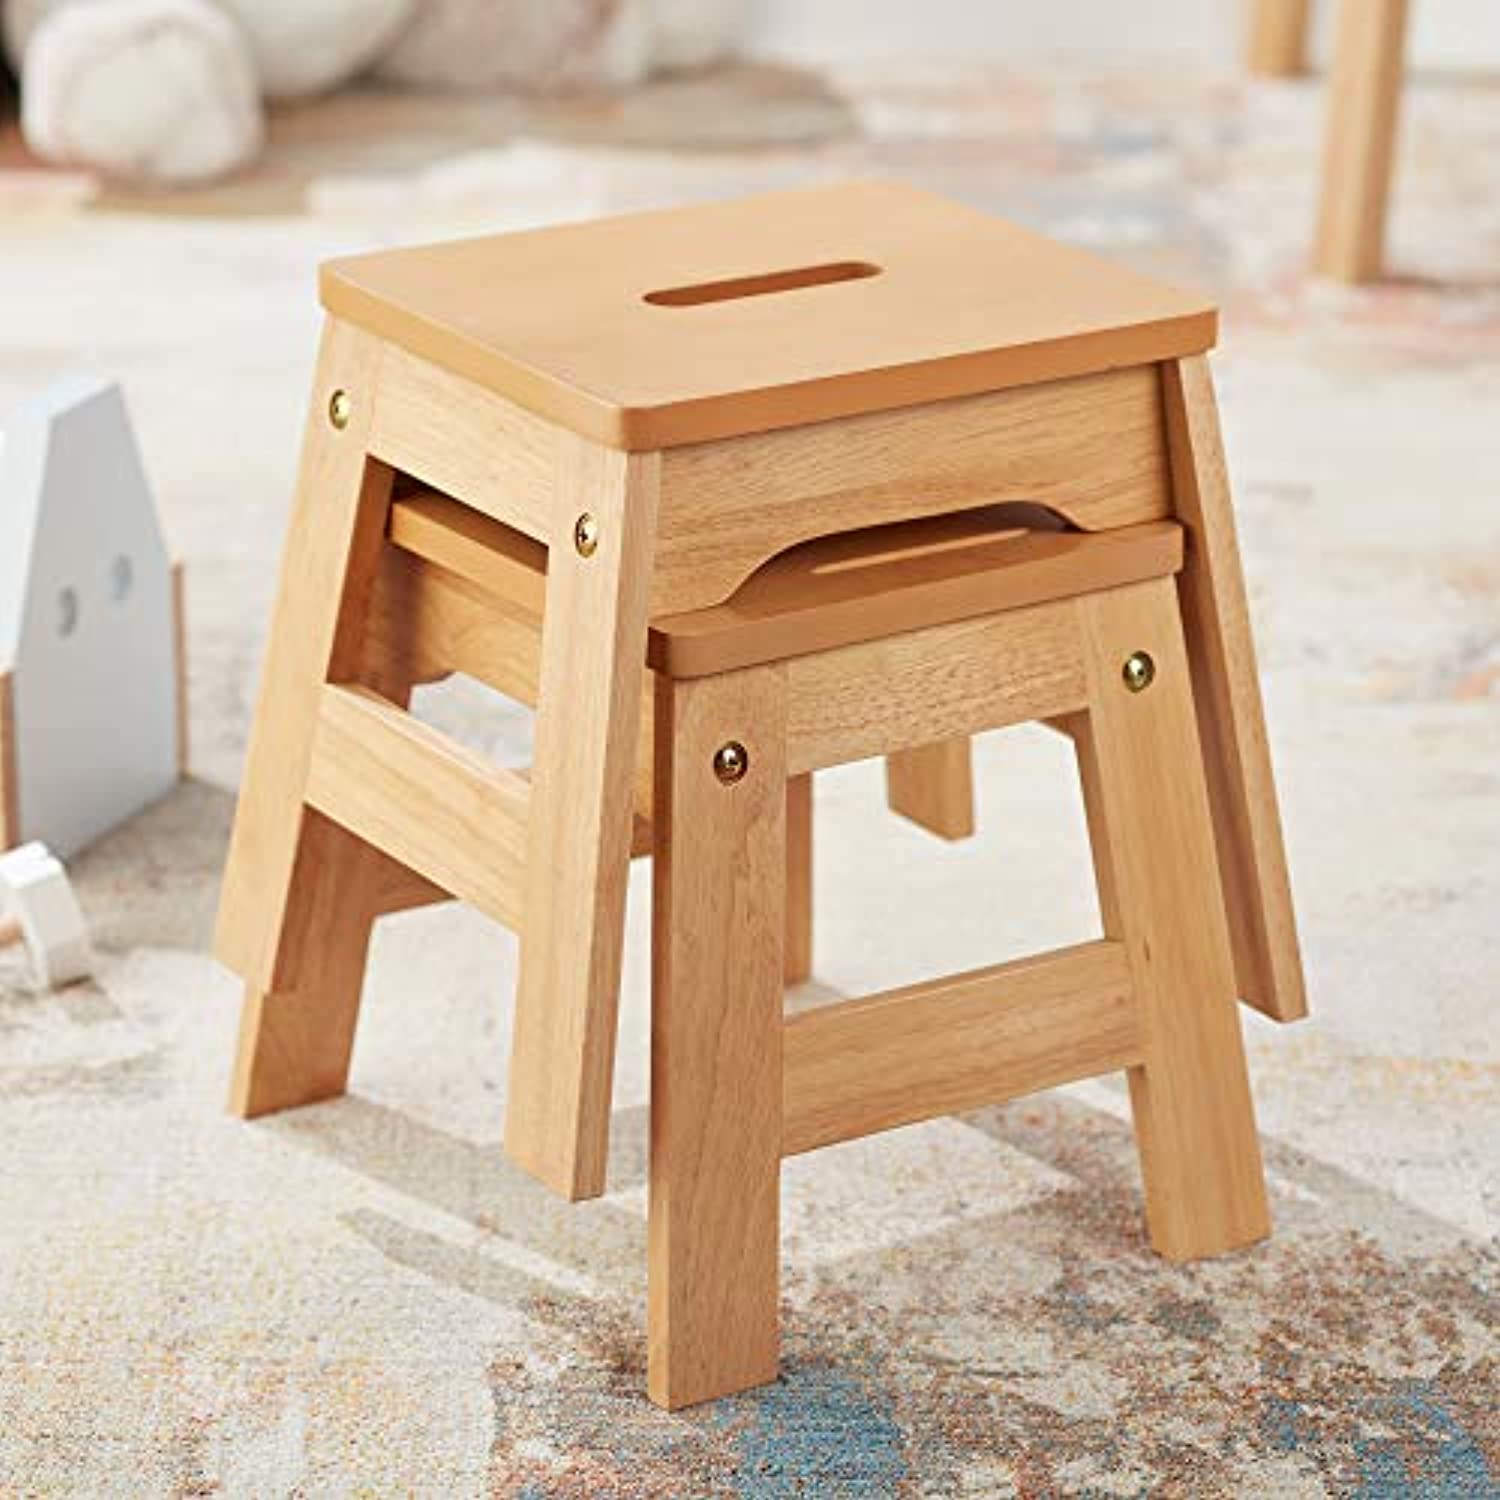 Melissa & Doug Wooden Stools - Set of 2 Stackable, 11-Inch-Tall - Natural